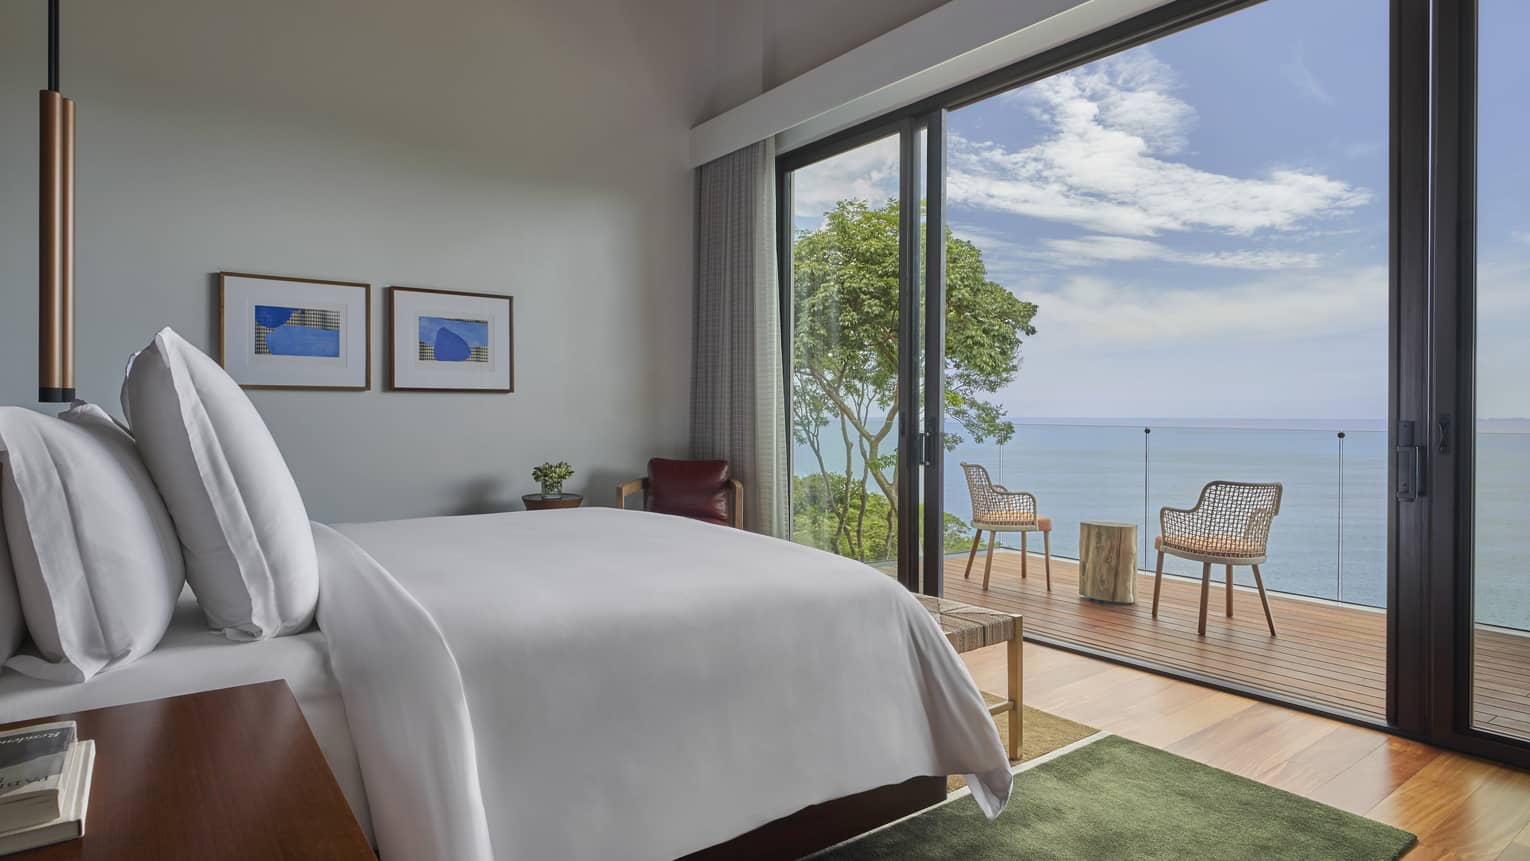 Bedroom facing wall of windows, looking out to a wooden deck with two chairs and the sea